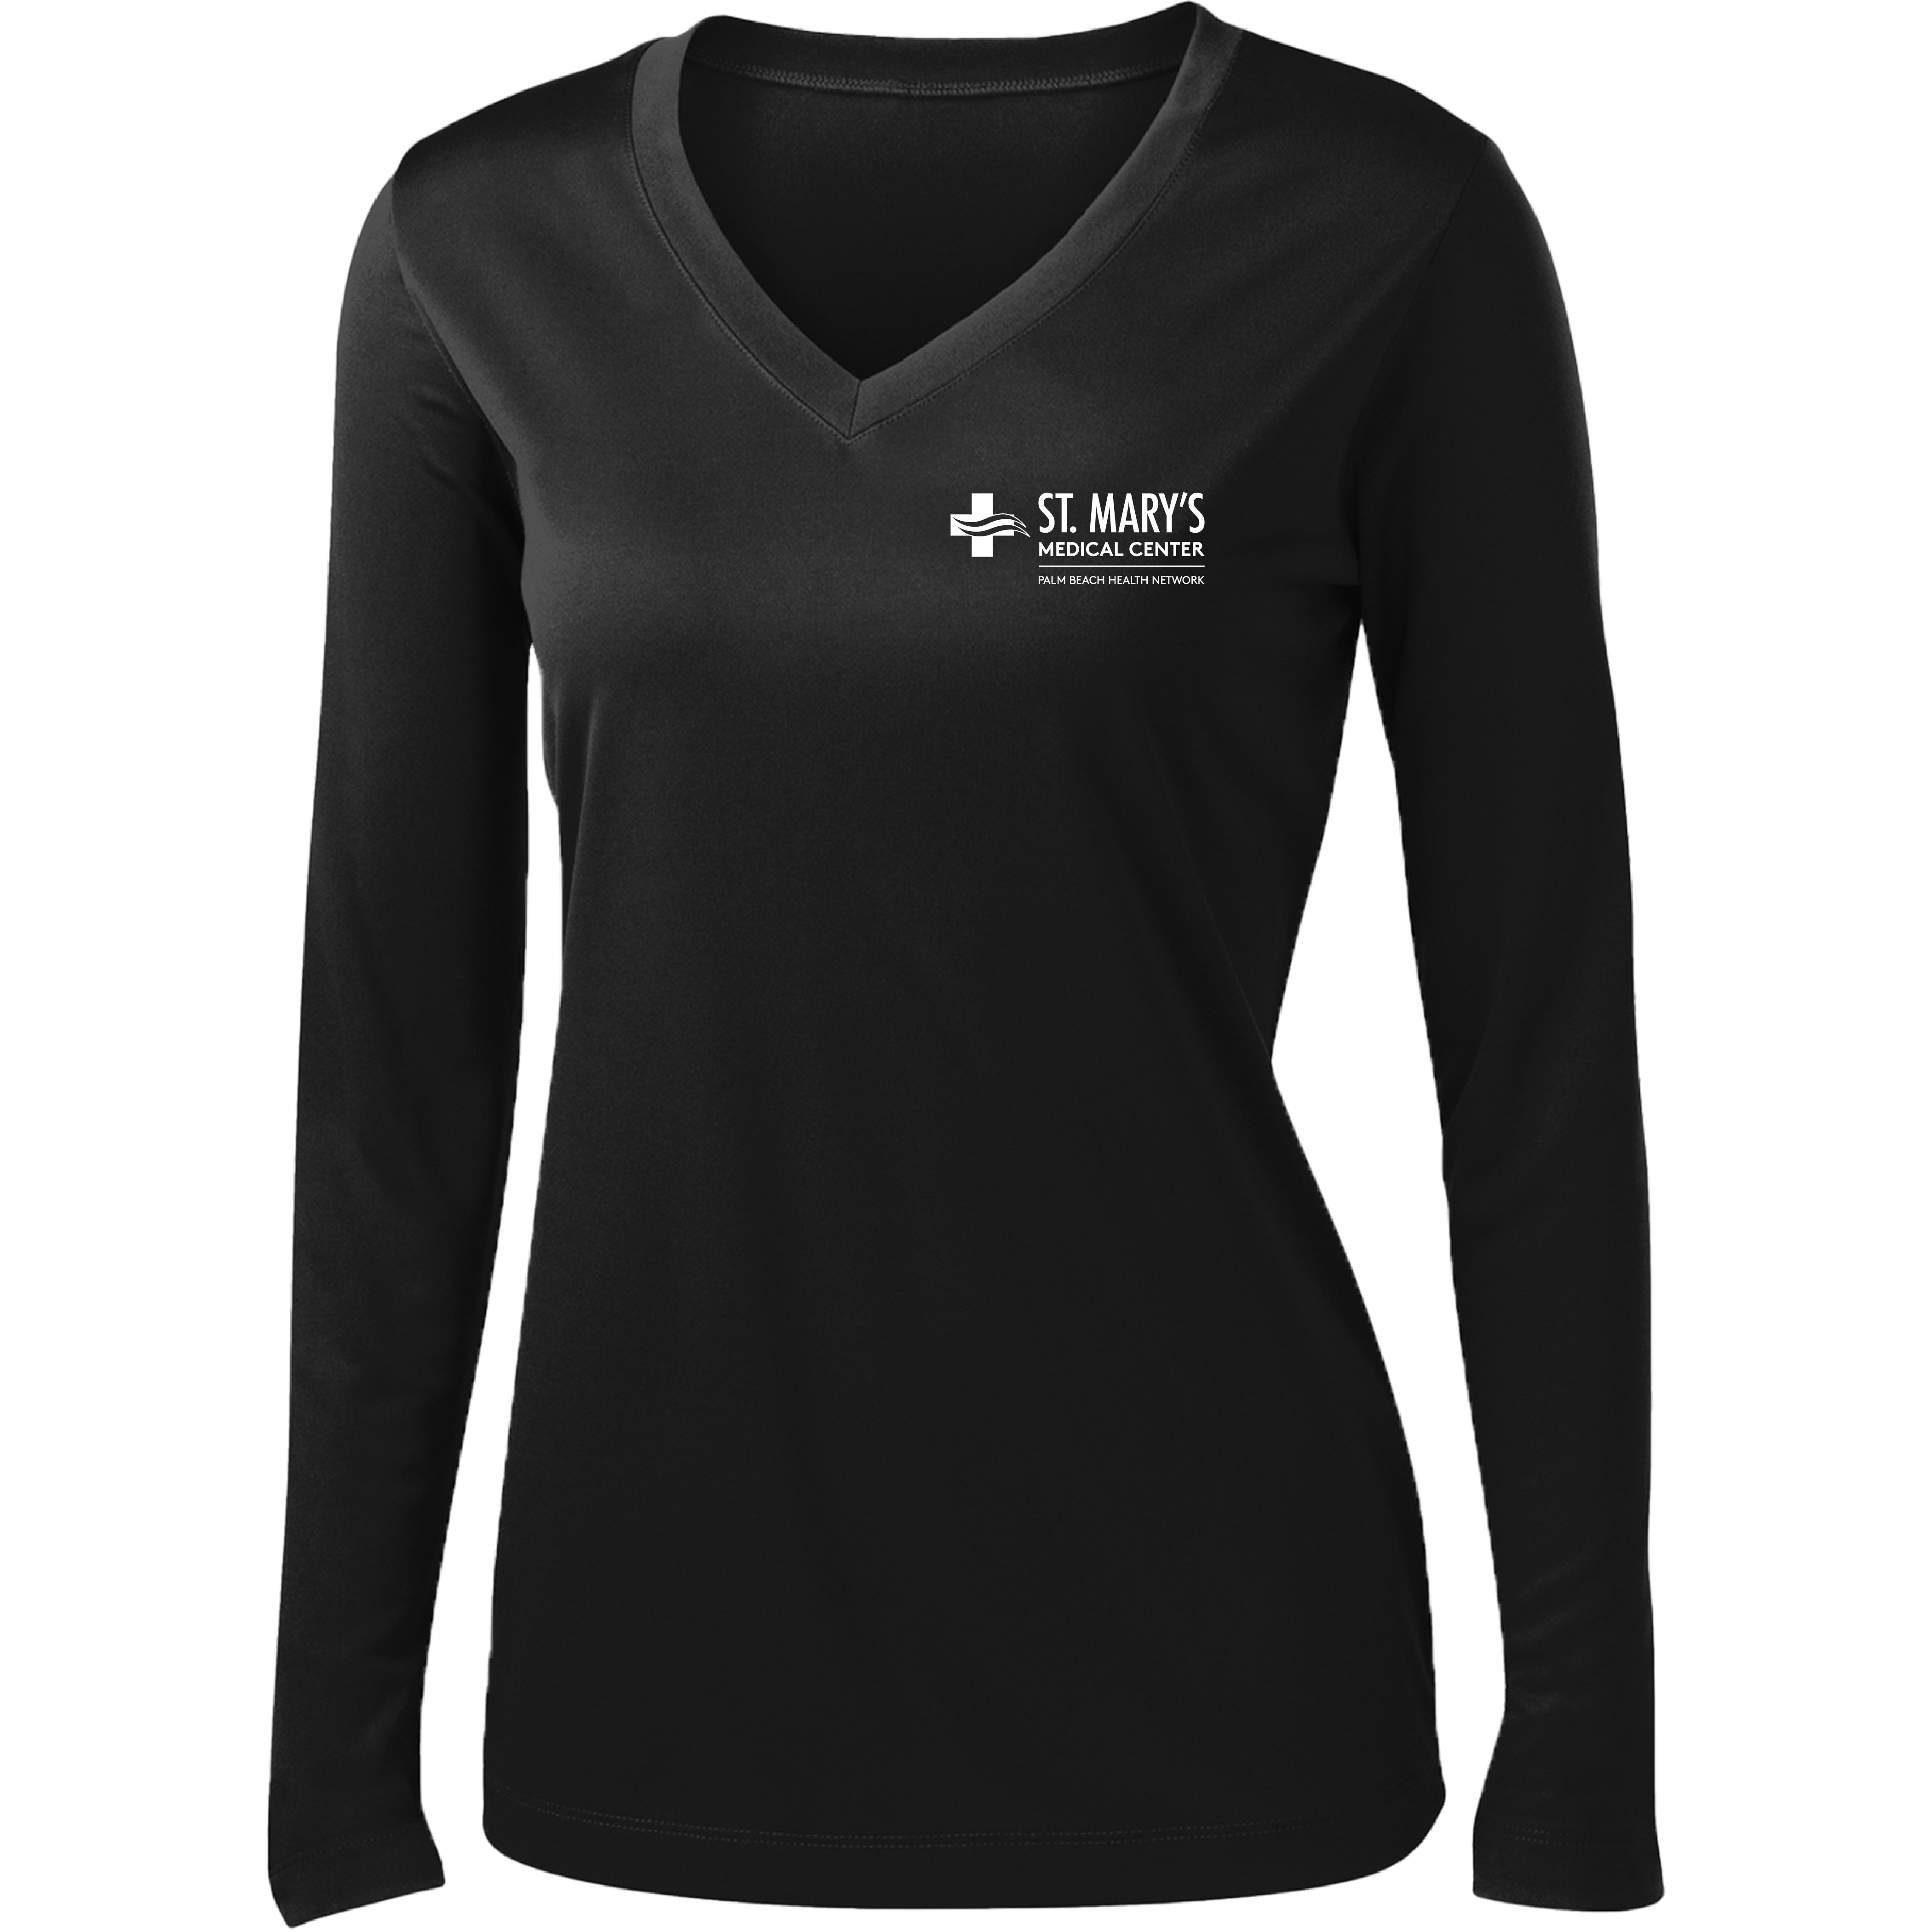 St. Mary's Hospital - Clean Hands Save Lives PERFORMANCE Long Sleeve V-Neck